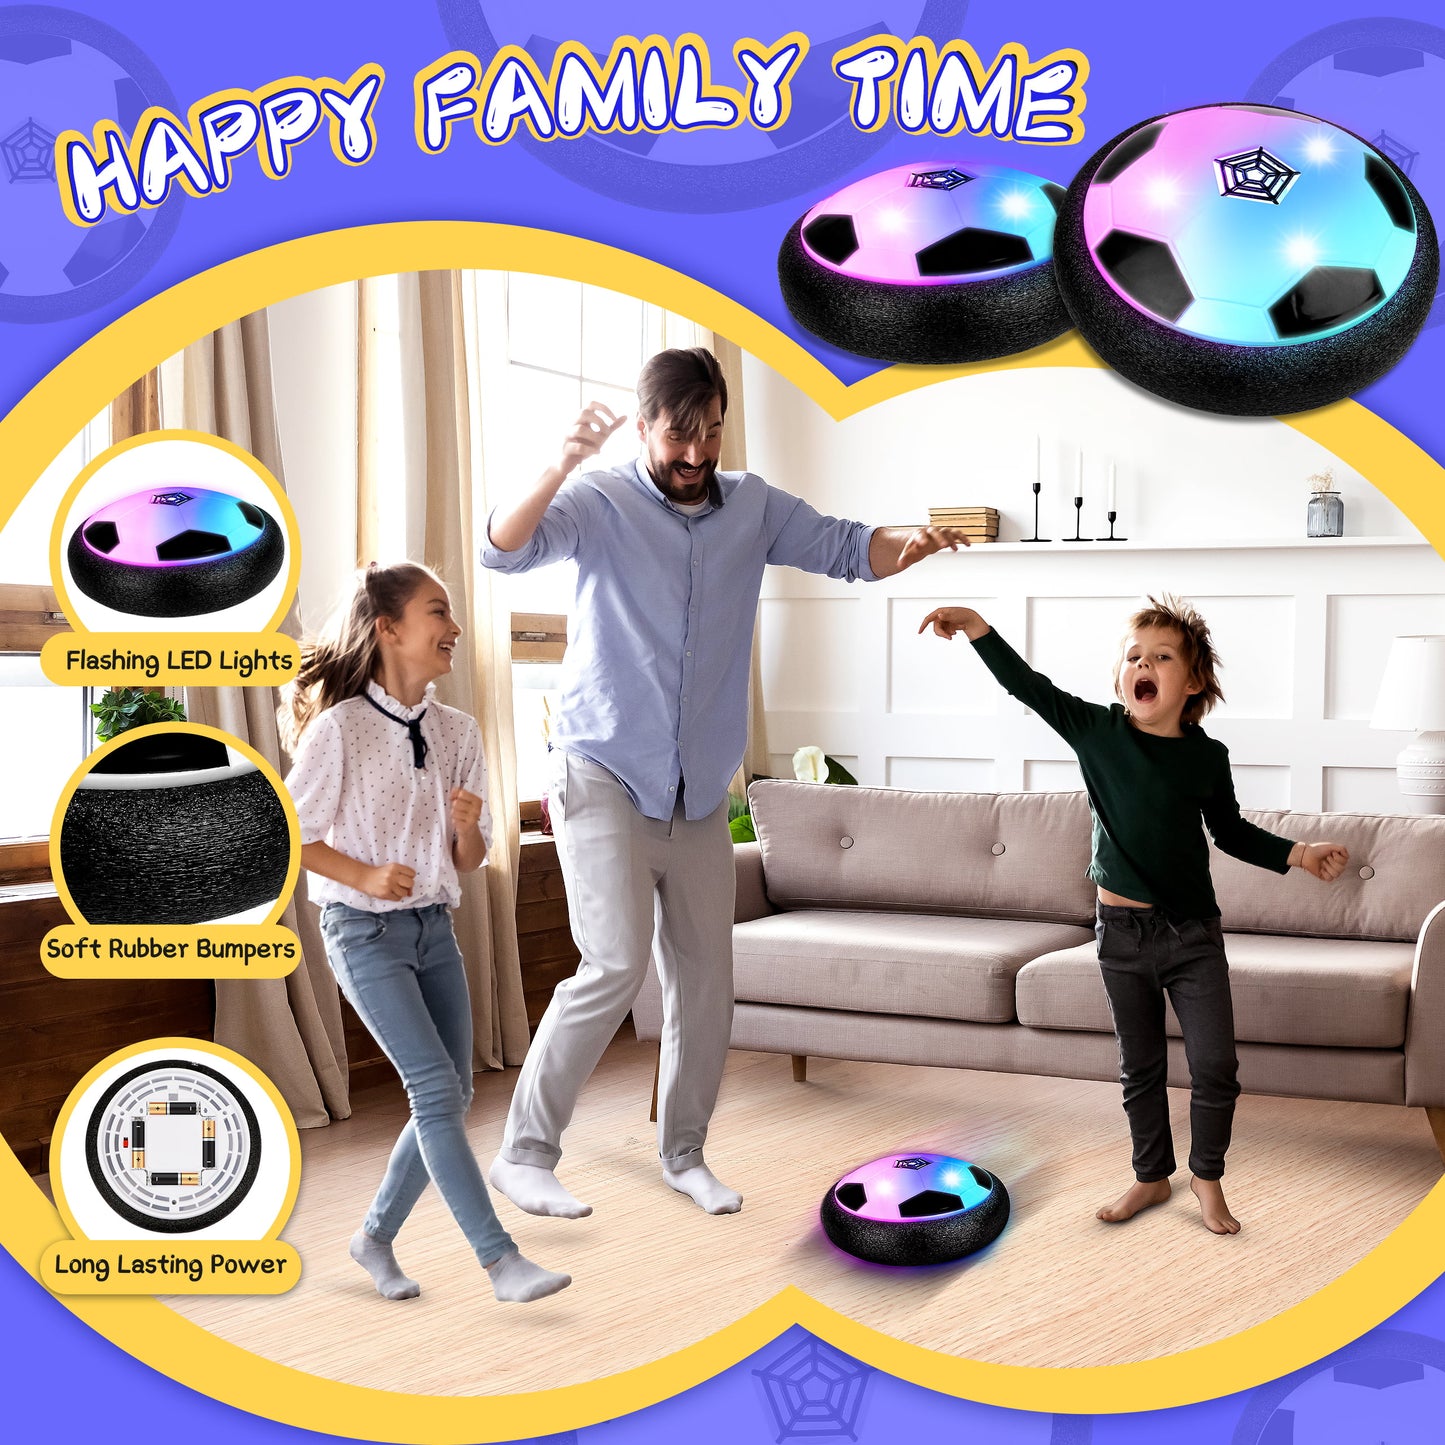 Hover Ball Toys for Boys & Girls - 2 LED Soccer Balls Indoor/Outdoor Games for Kids 3+ Year Old